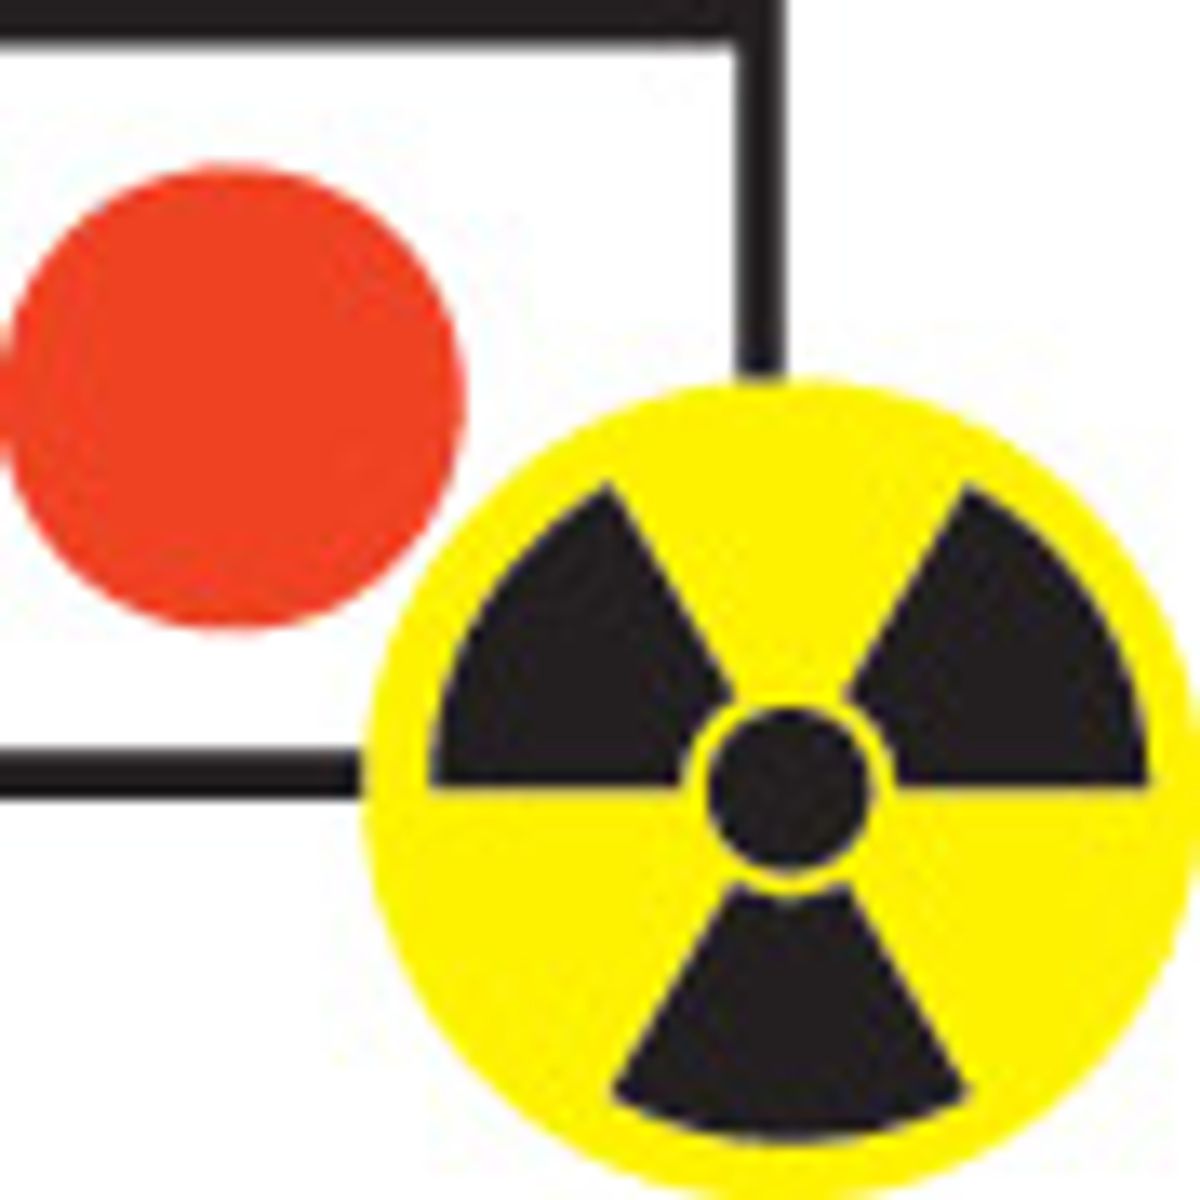 Timeline: The Japanese Nuclear Emergency